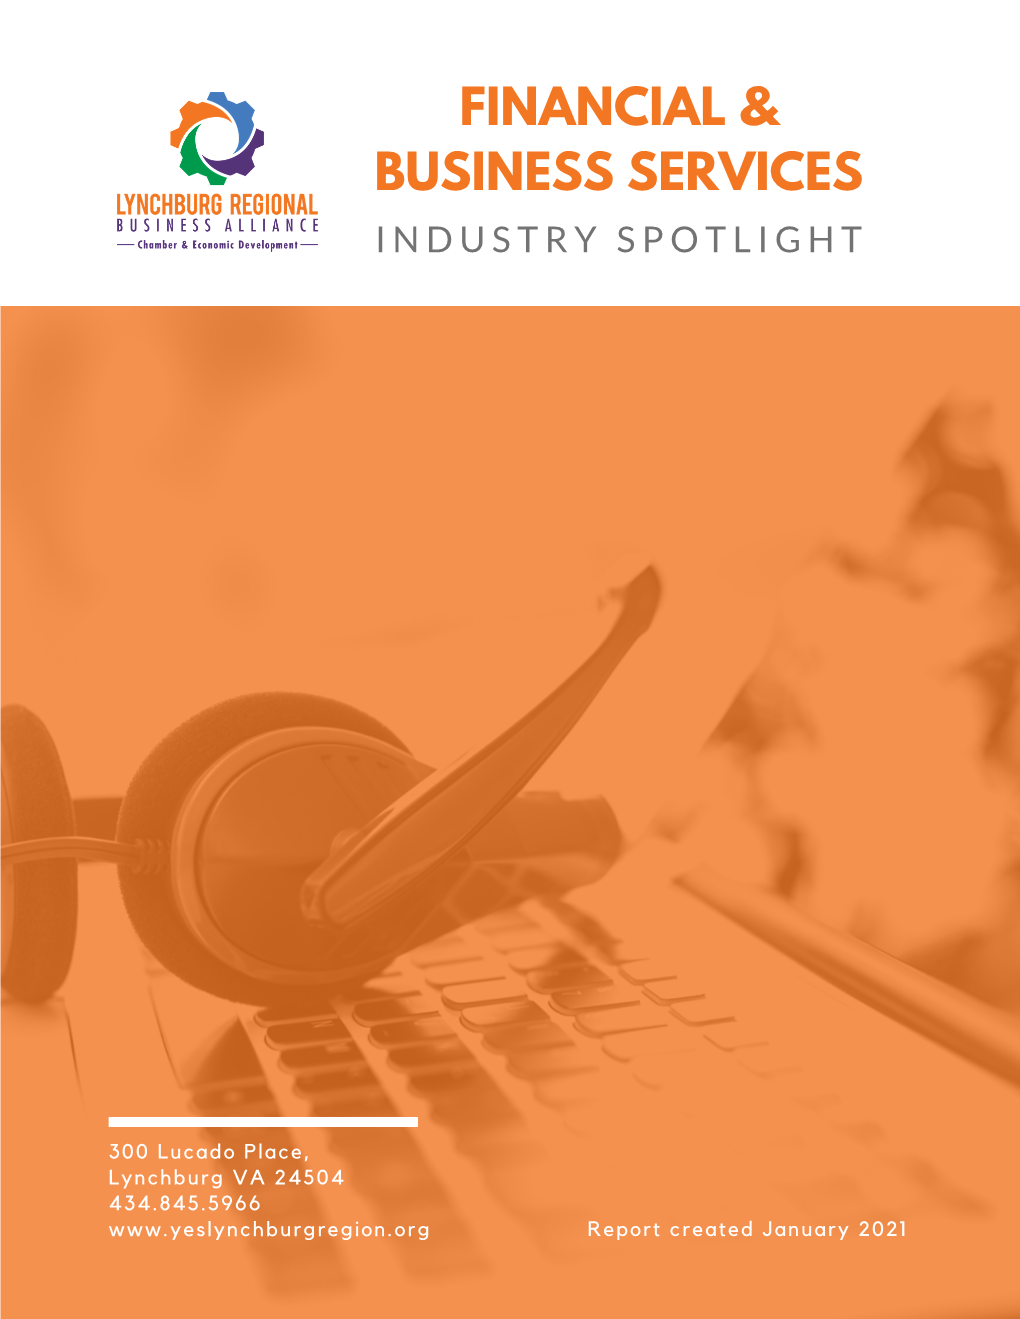 Financial & Business Services in the Lynchburg Region